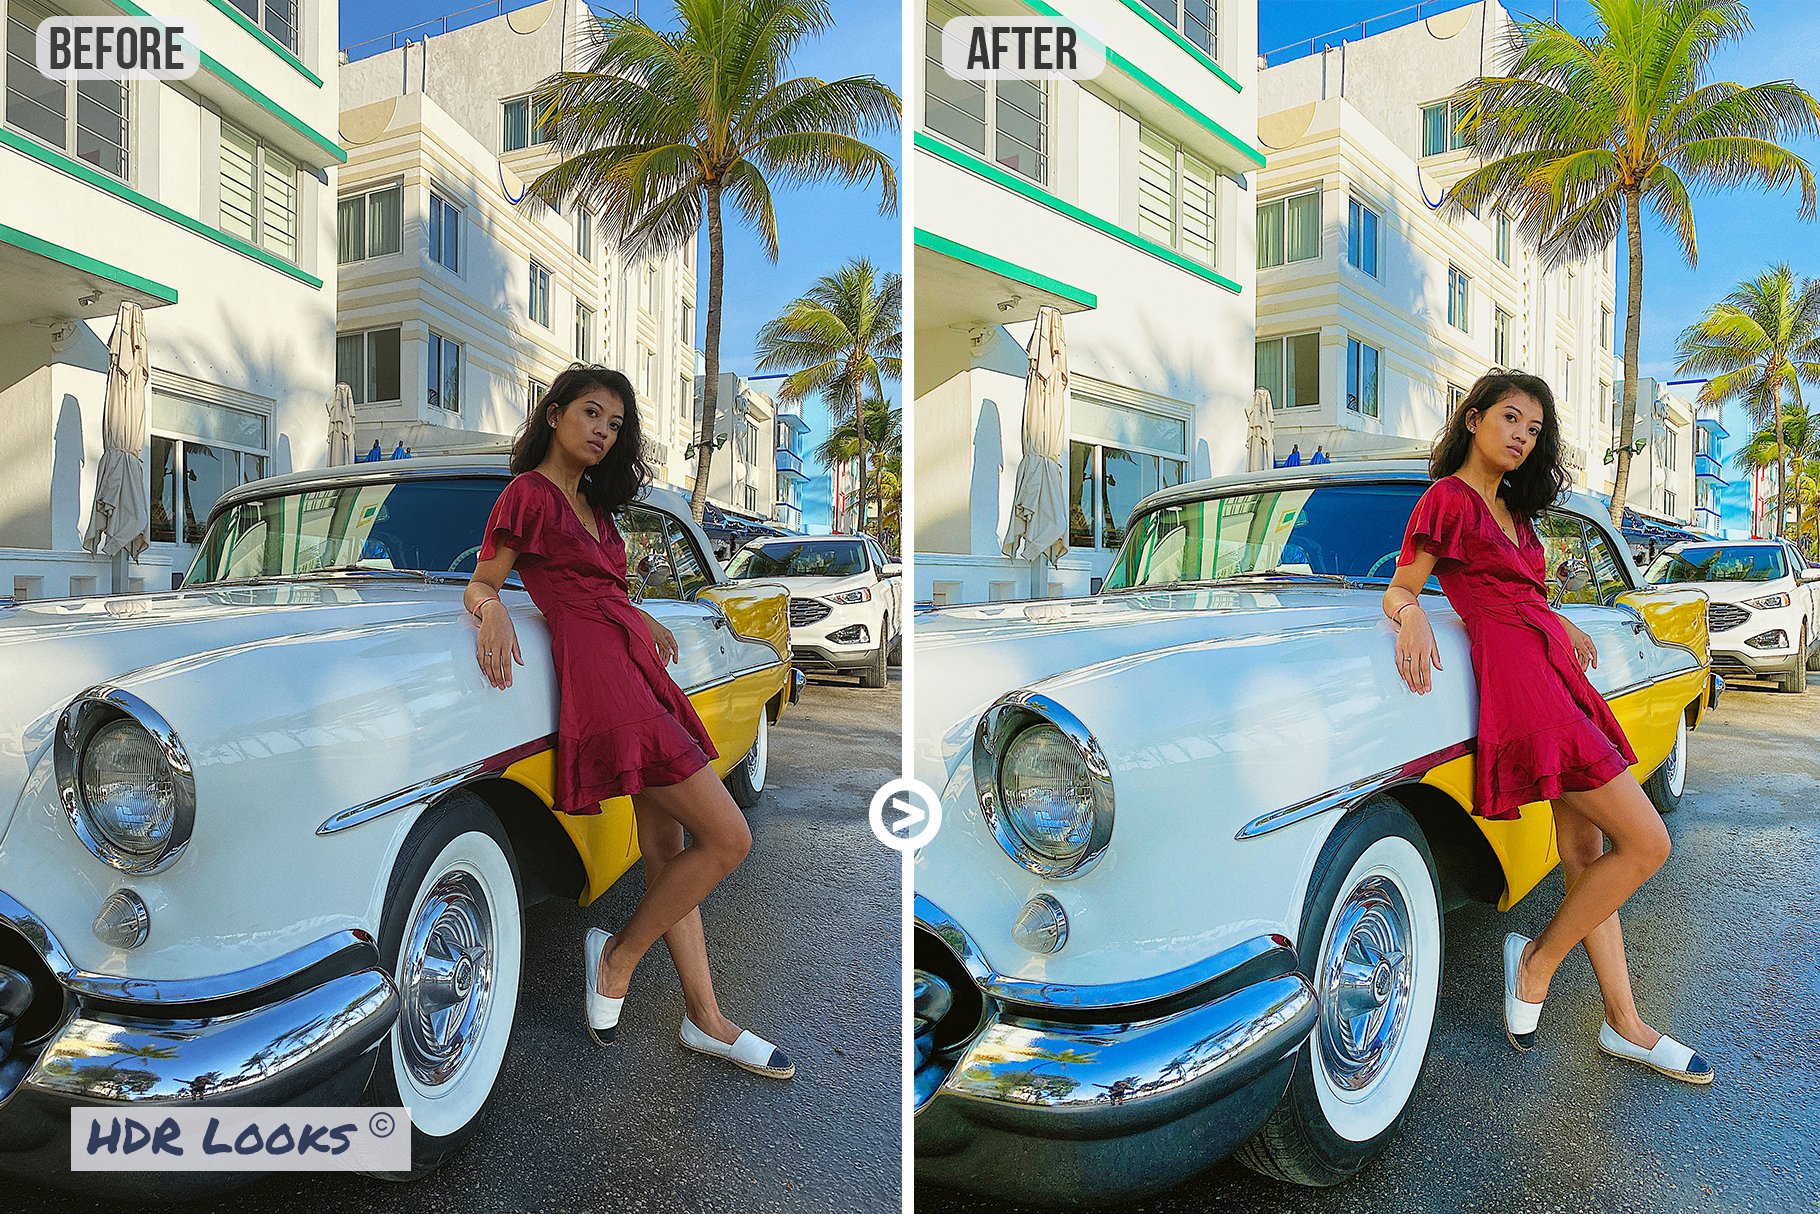 HDR Looks - LUTs Packpreview image.